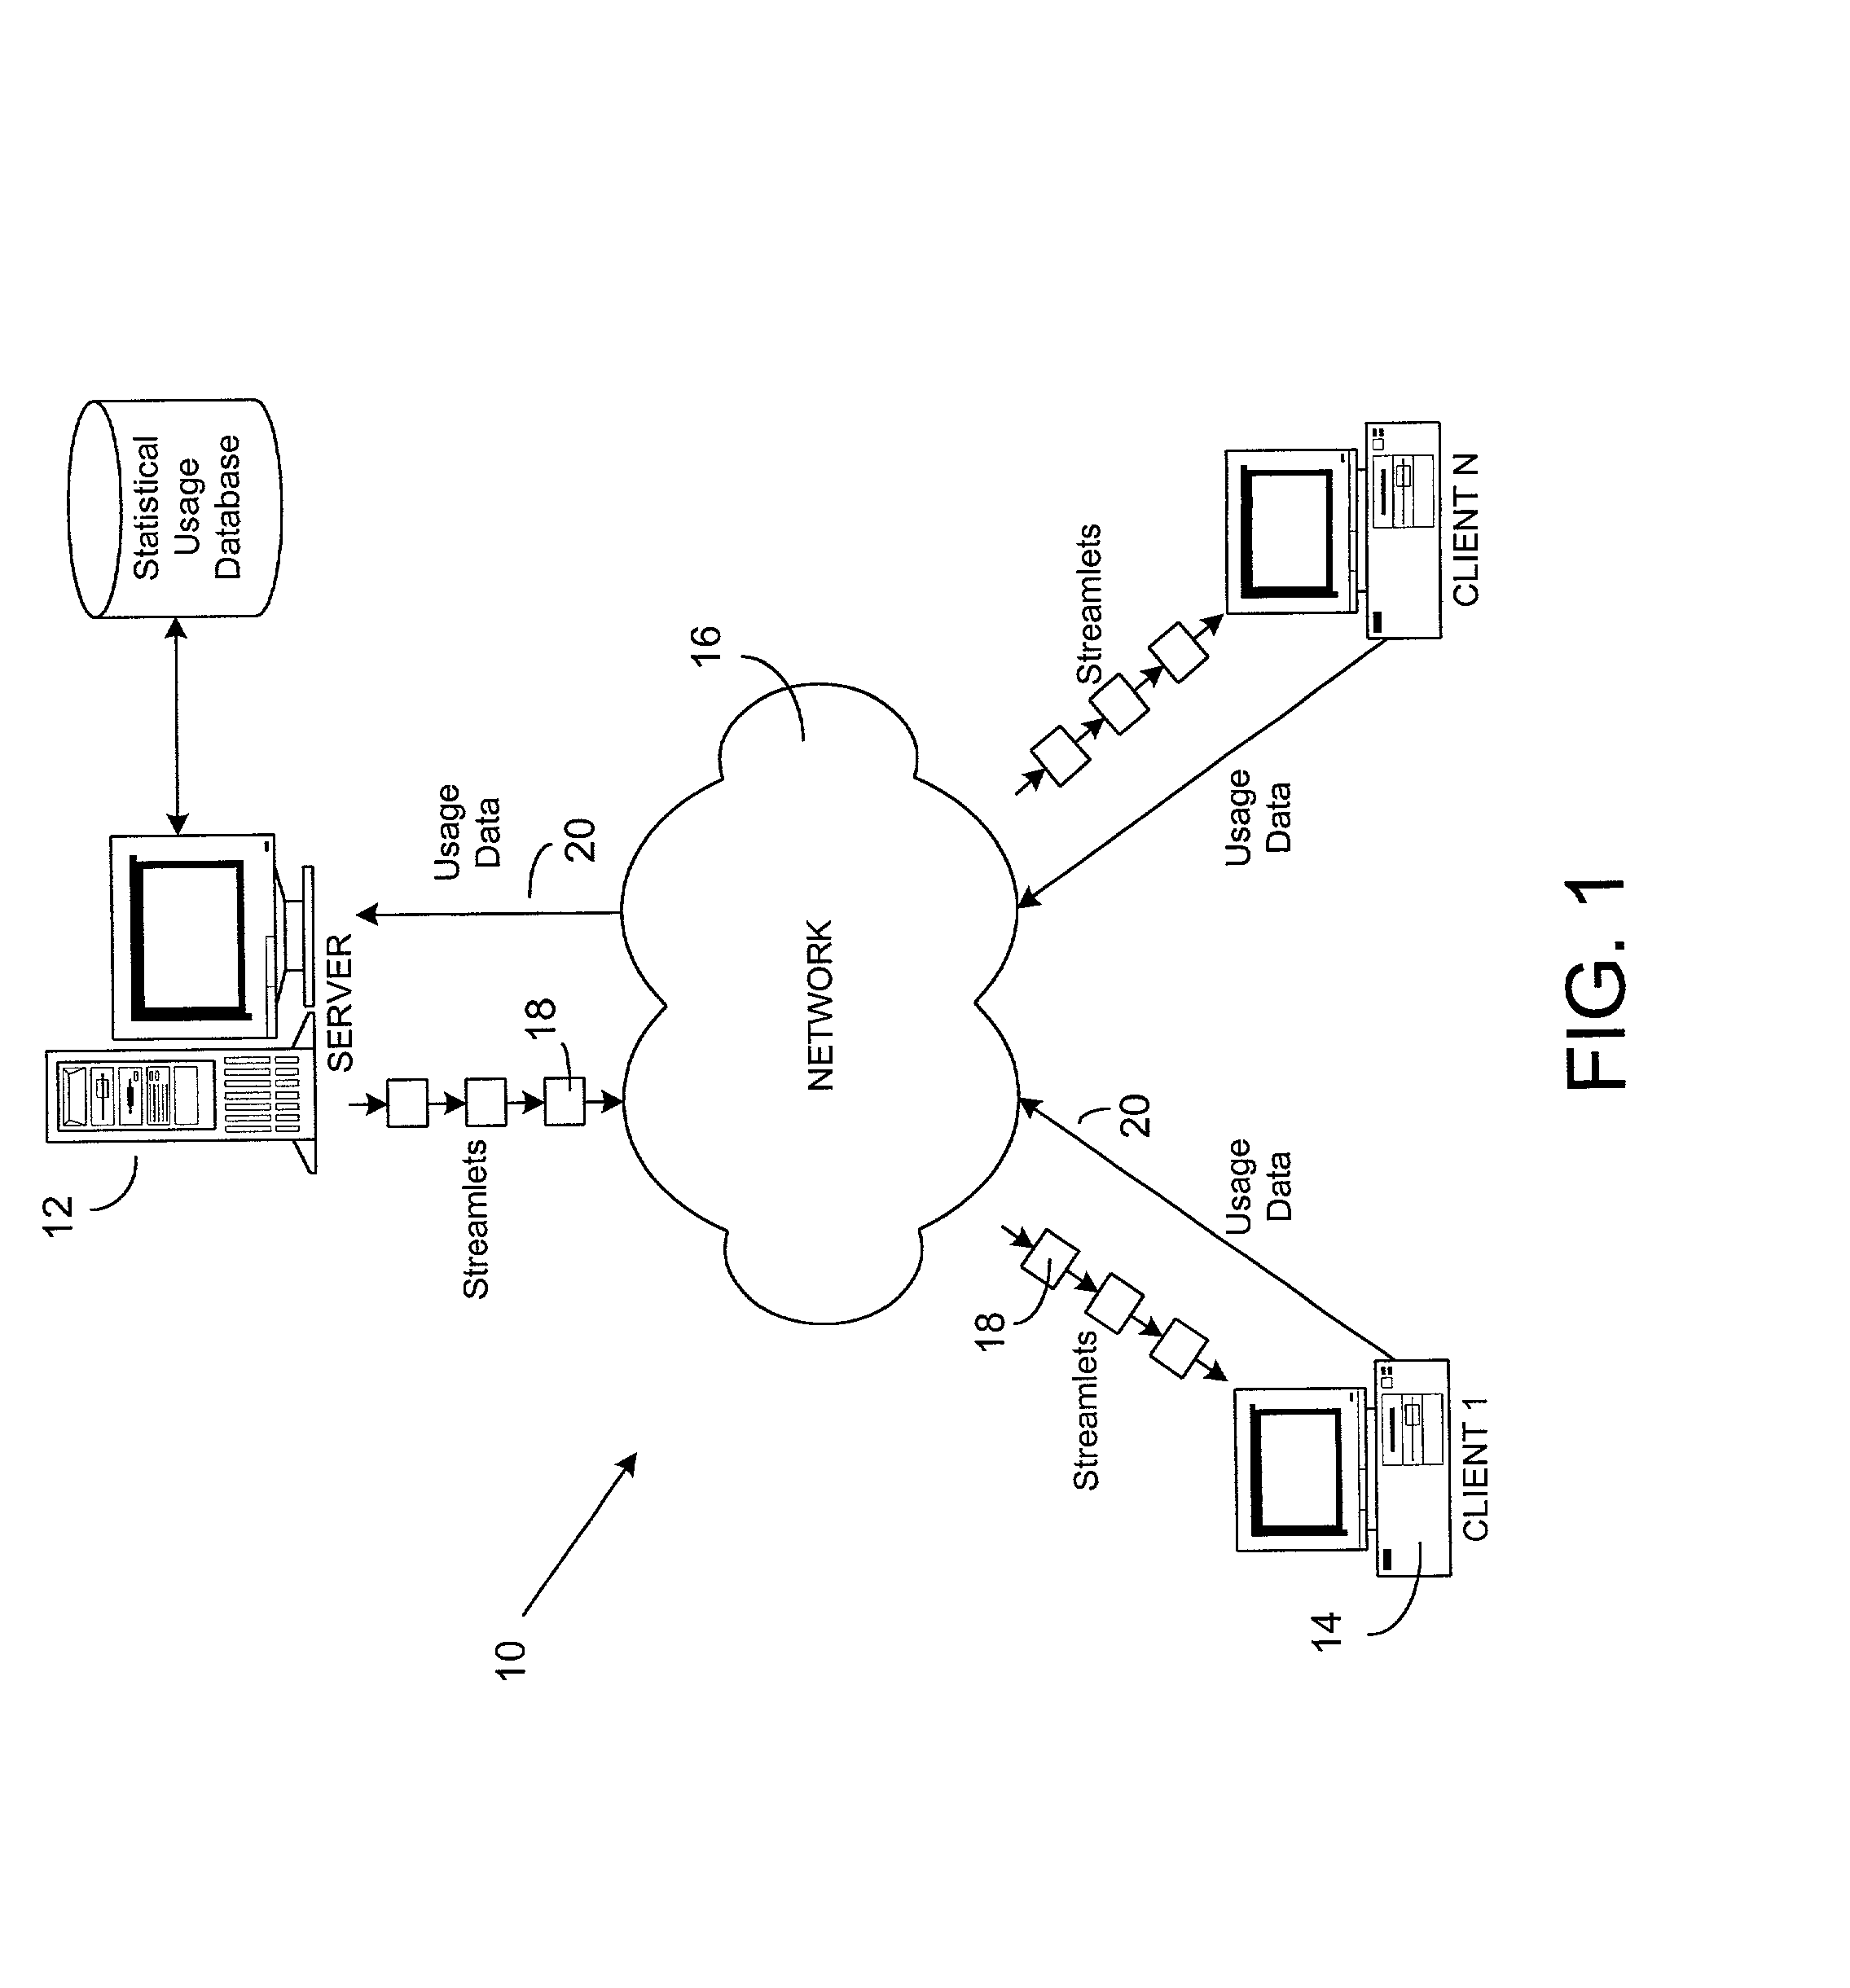 Method and system for streaming software applications to a client